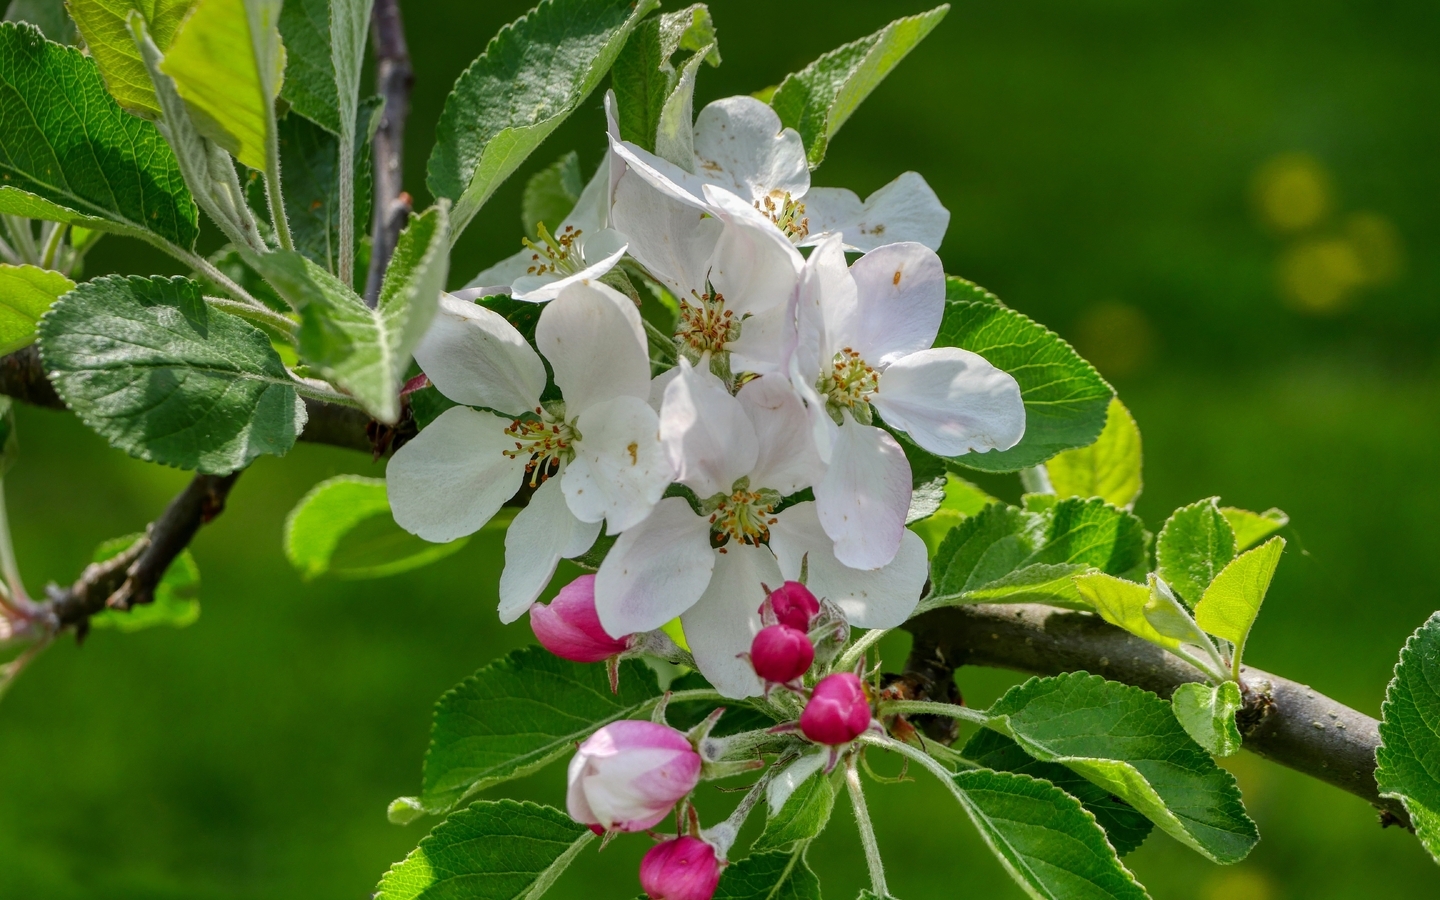 Image: Flowers, white, branch, leaves, green background